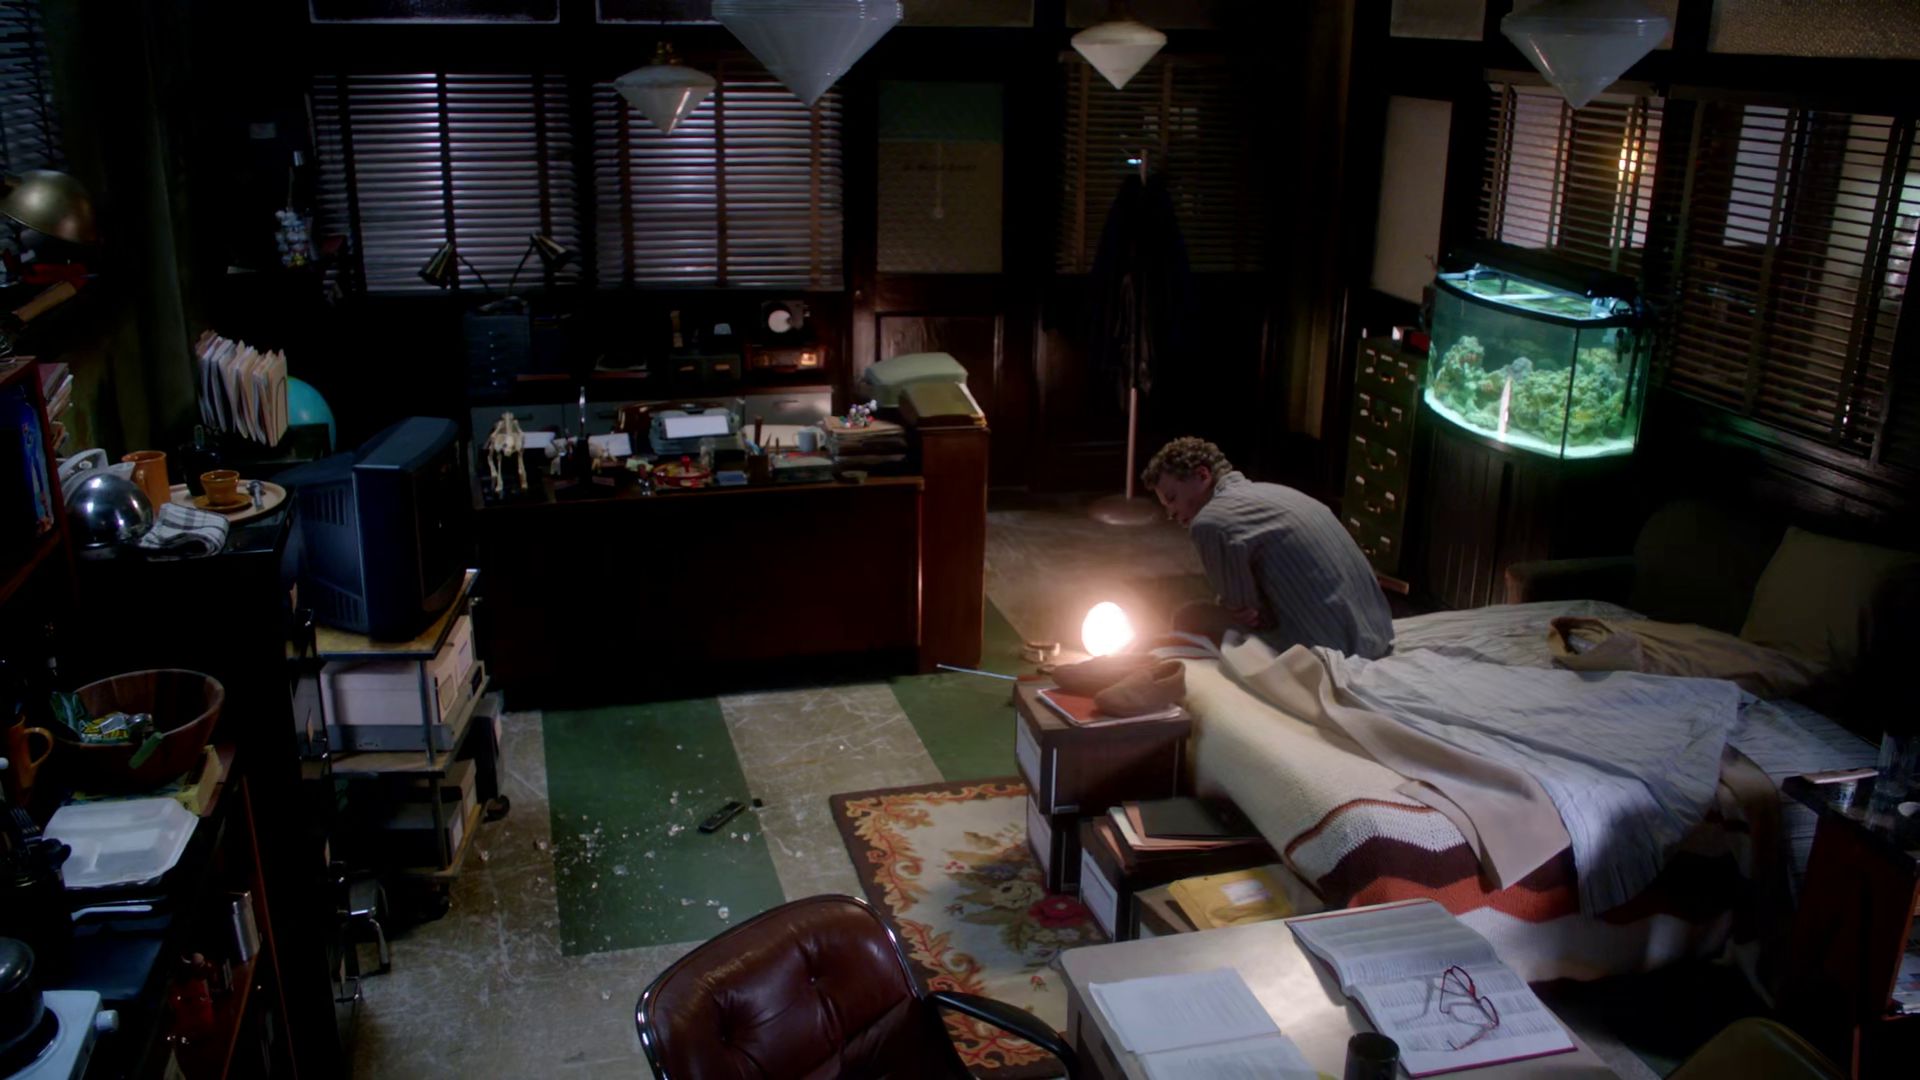 Difference: Walter's room in the lab